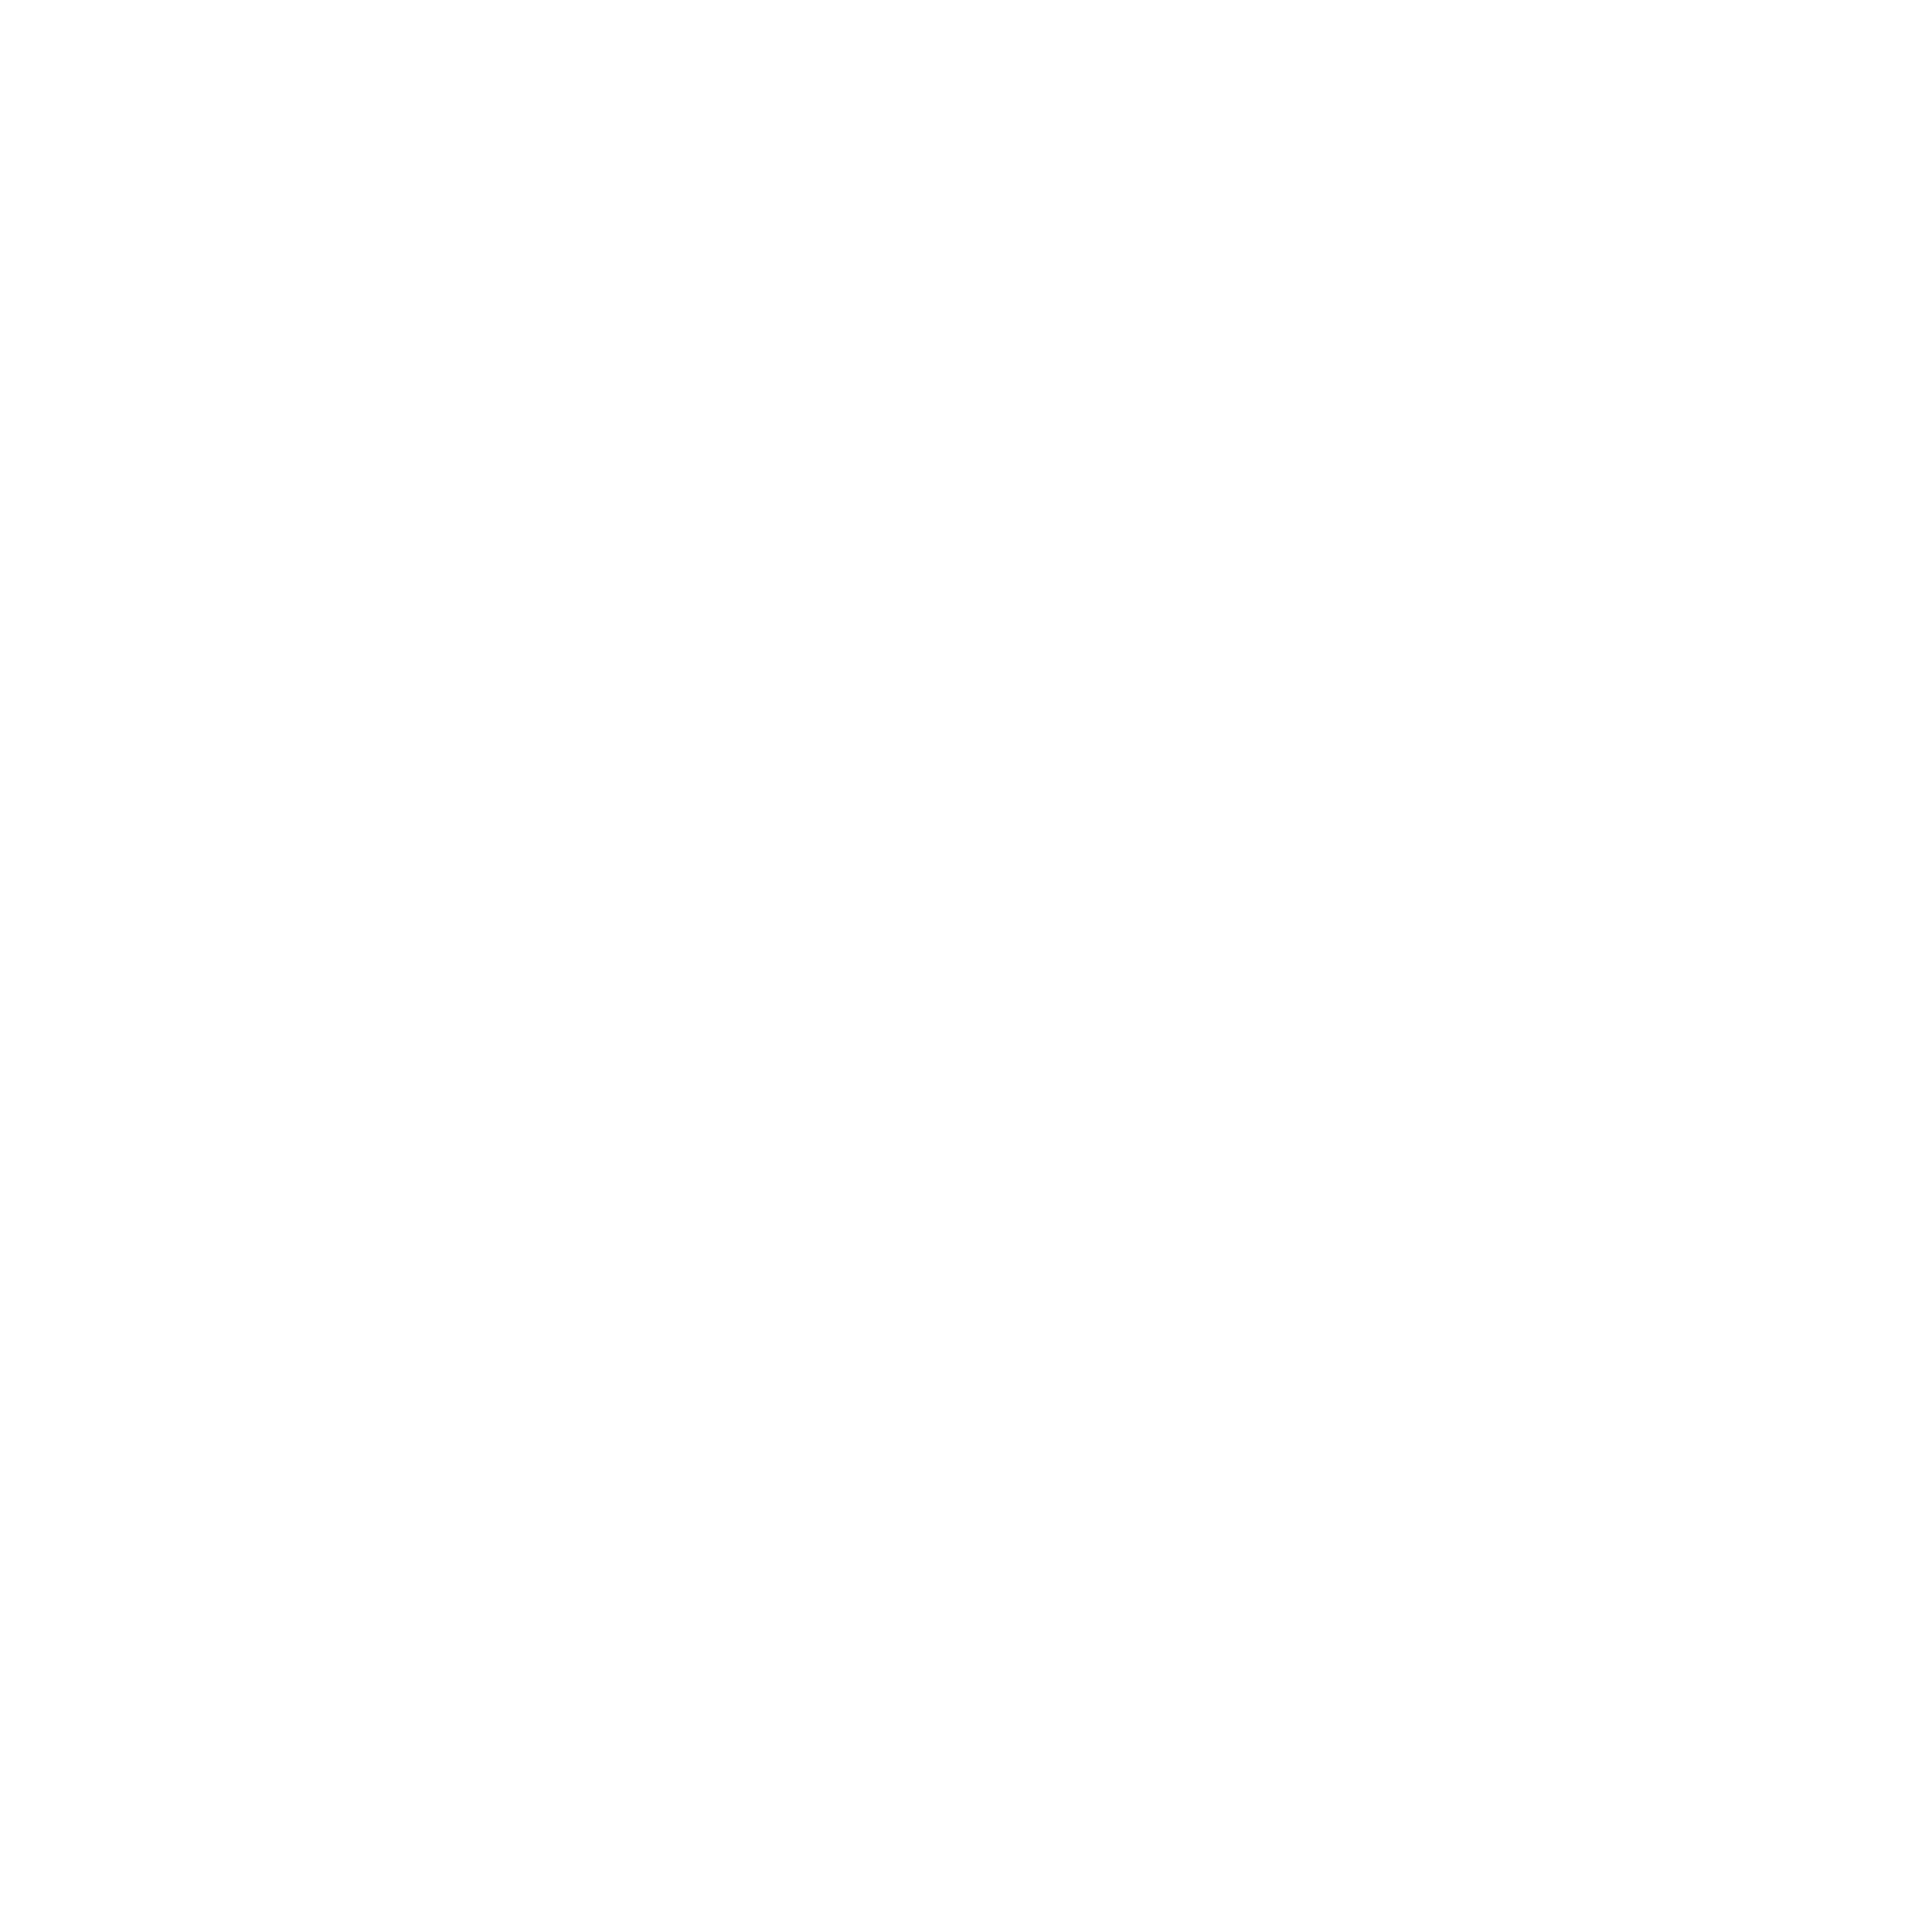 [ID&KYC Forum] Webconference – Social engineering and identity theft: new trends and countermeasures